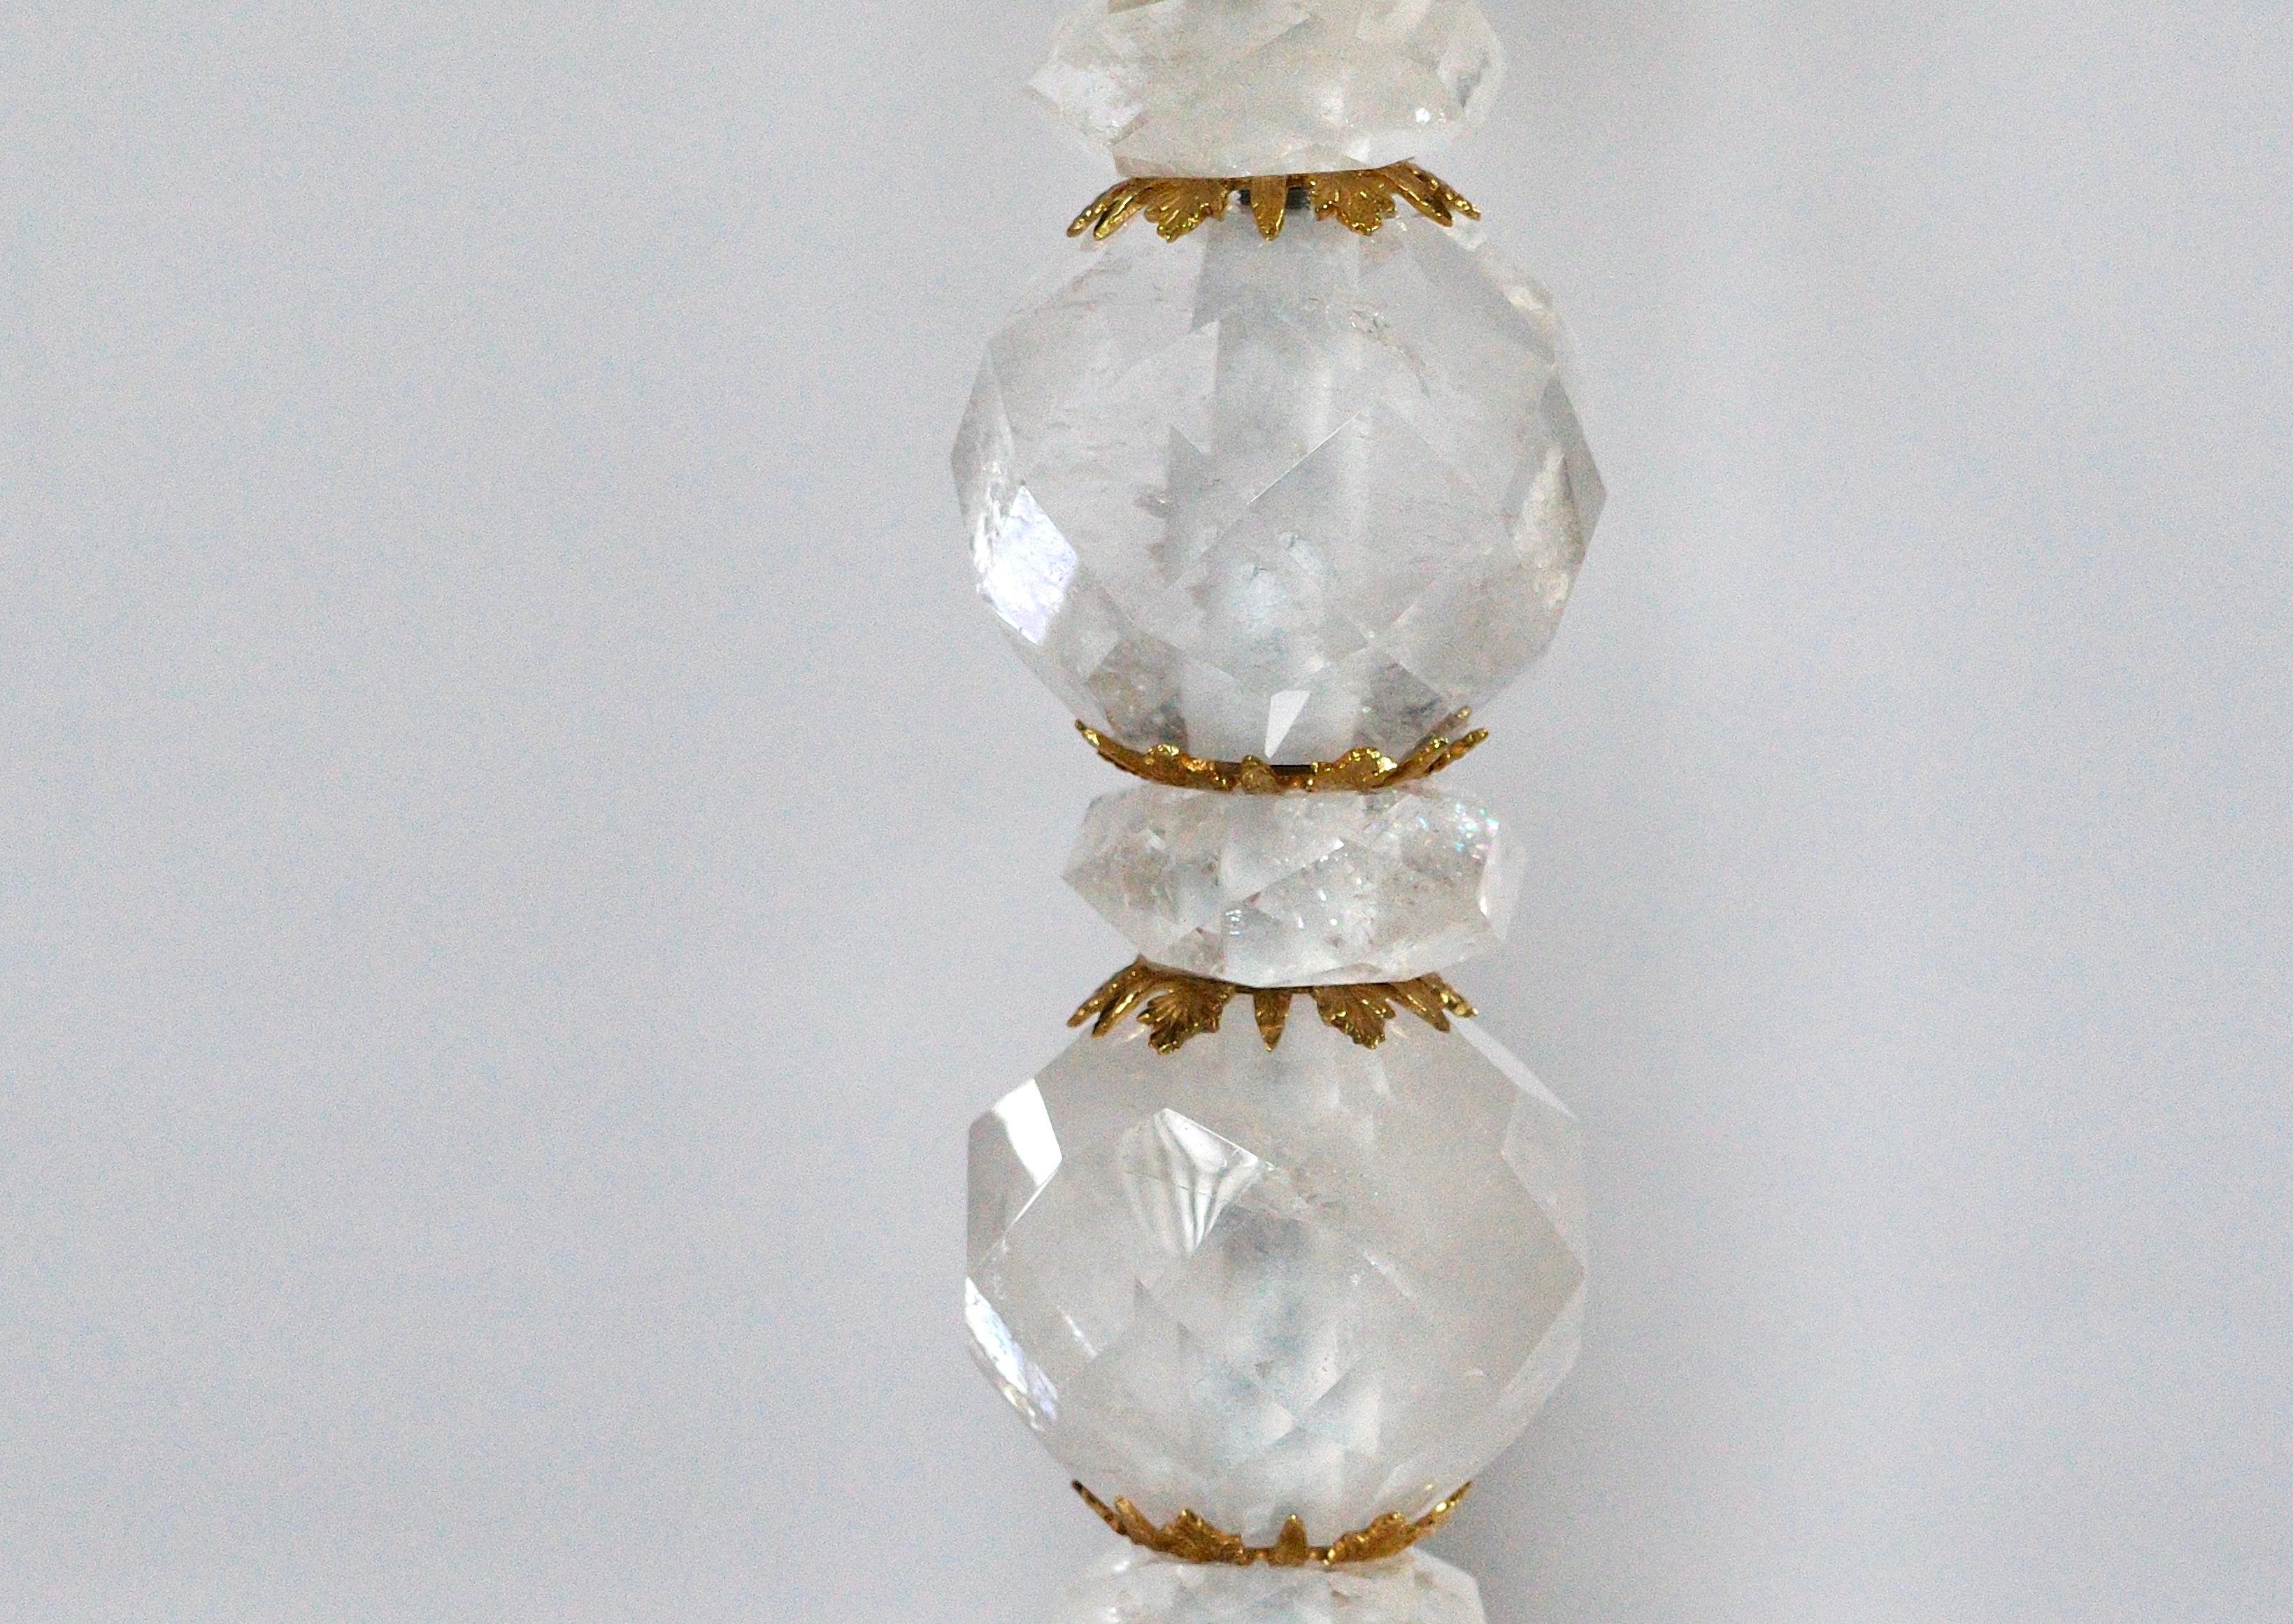 Contemporary Ormolu-Mounted Rock Crystal Quartz Lamps by Phoenix For Sale